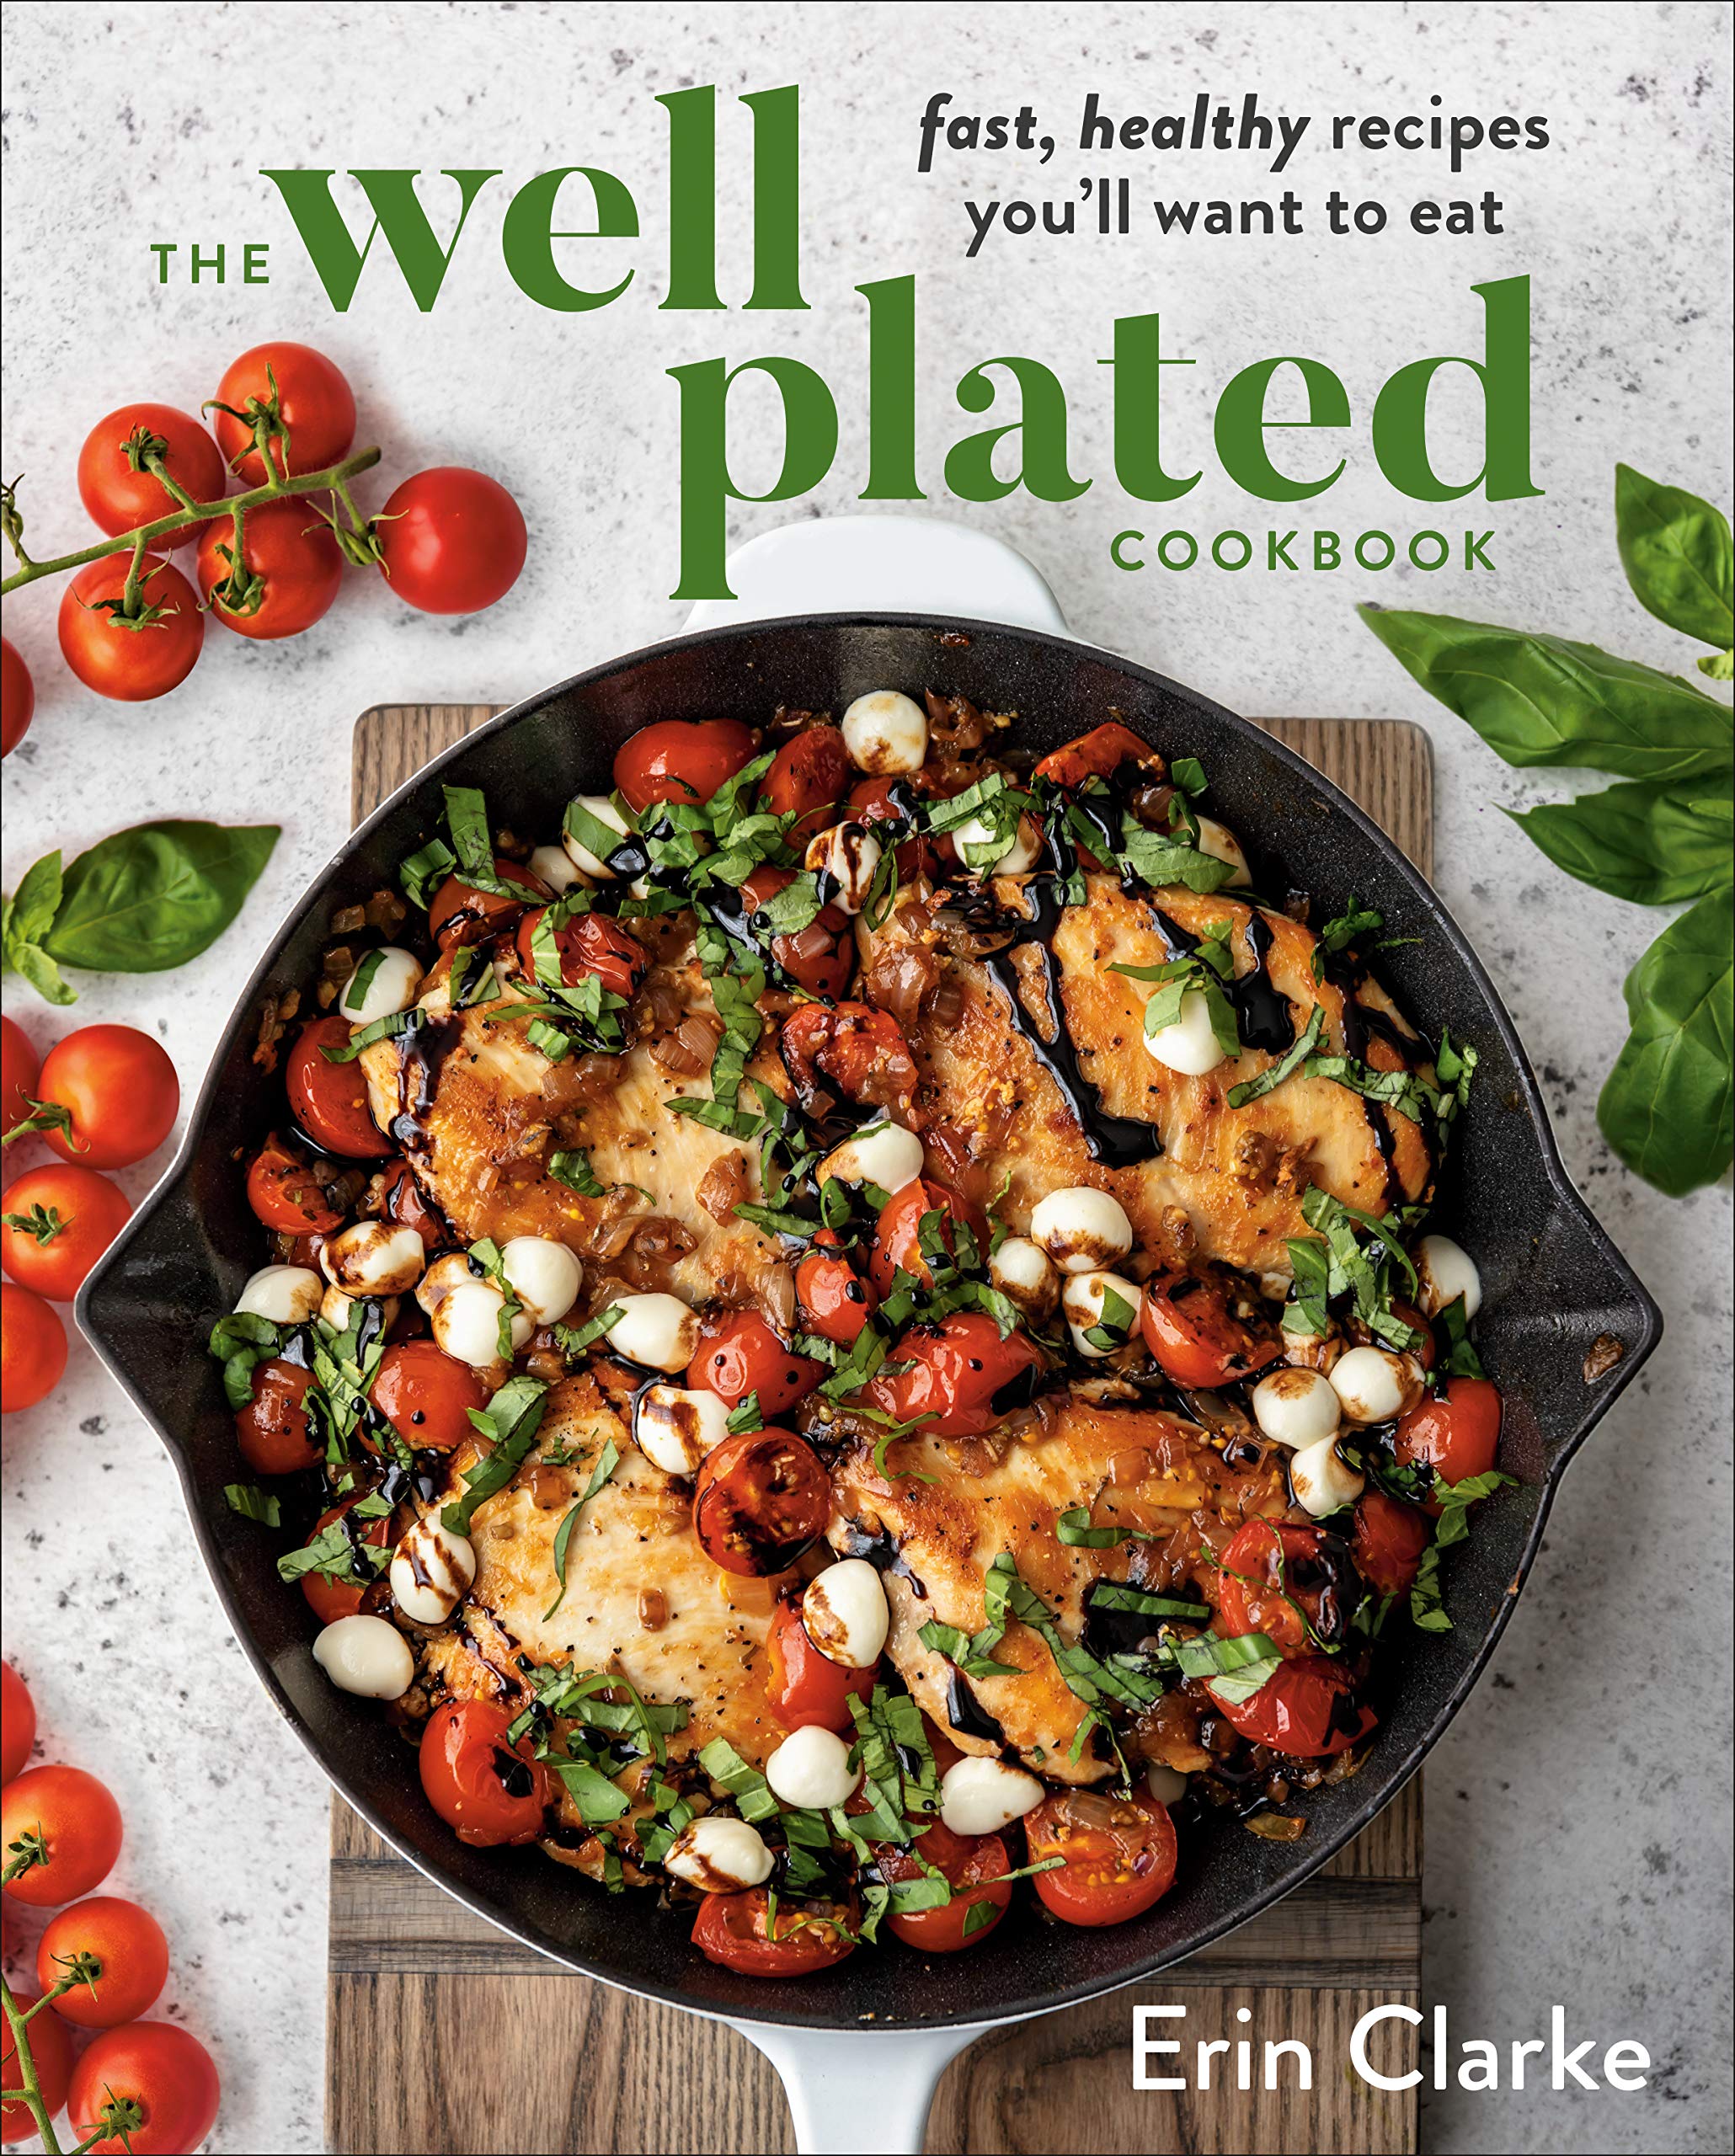 The Well Plated Cookbook: Fast, Healthy Recipes You’ll Want to Eat